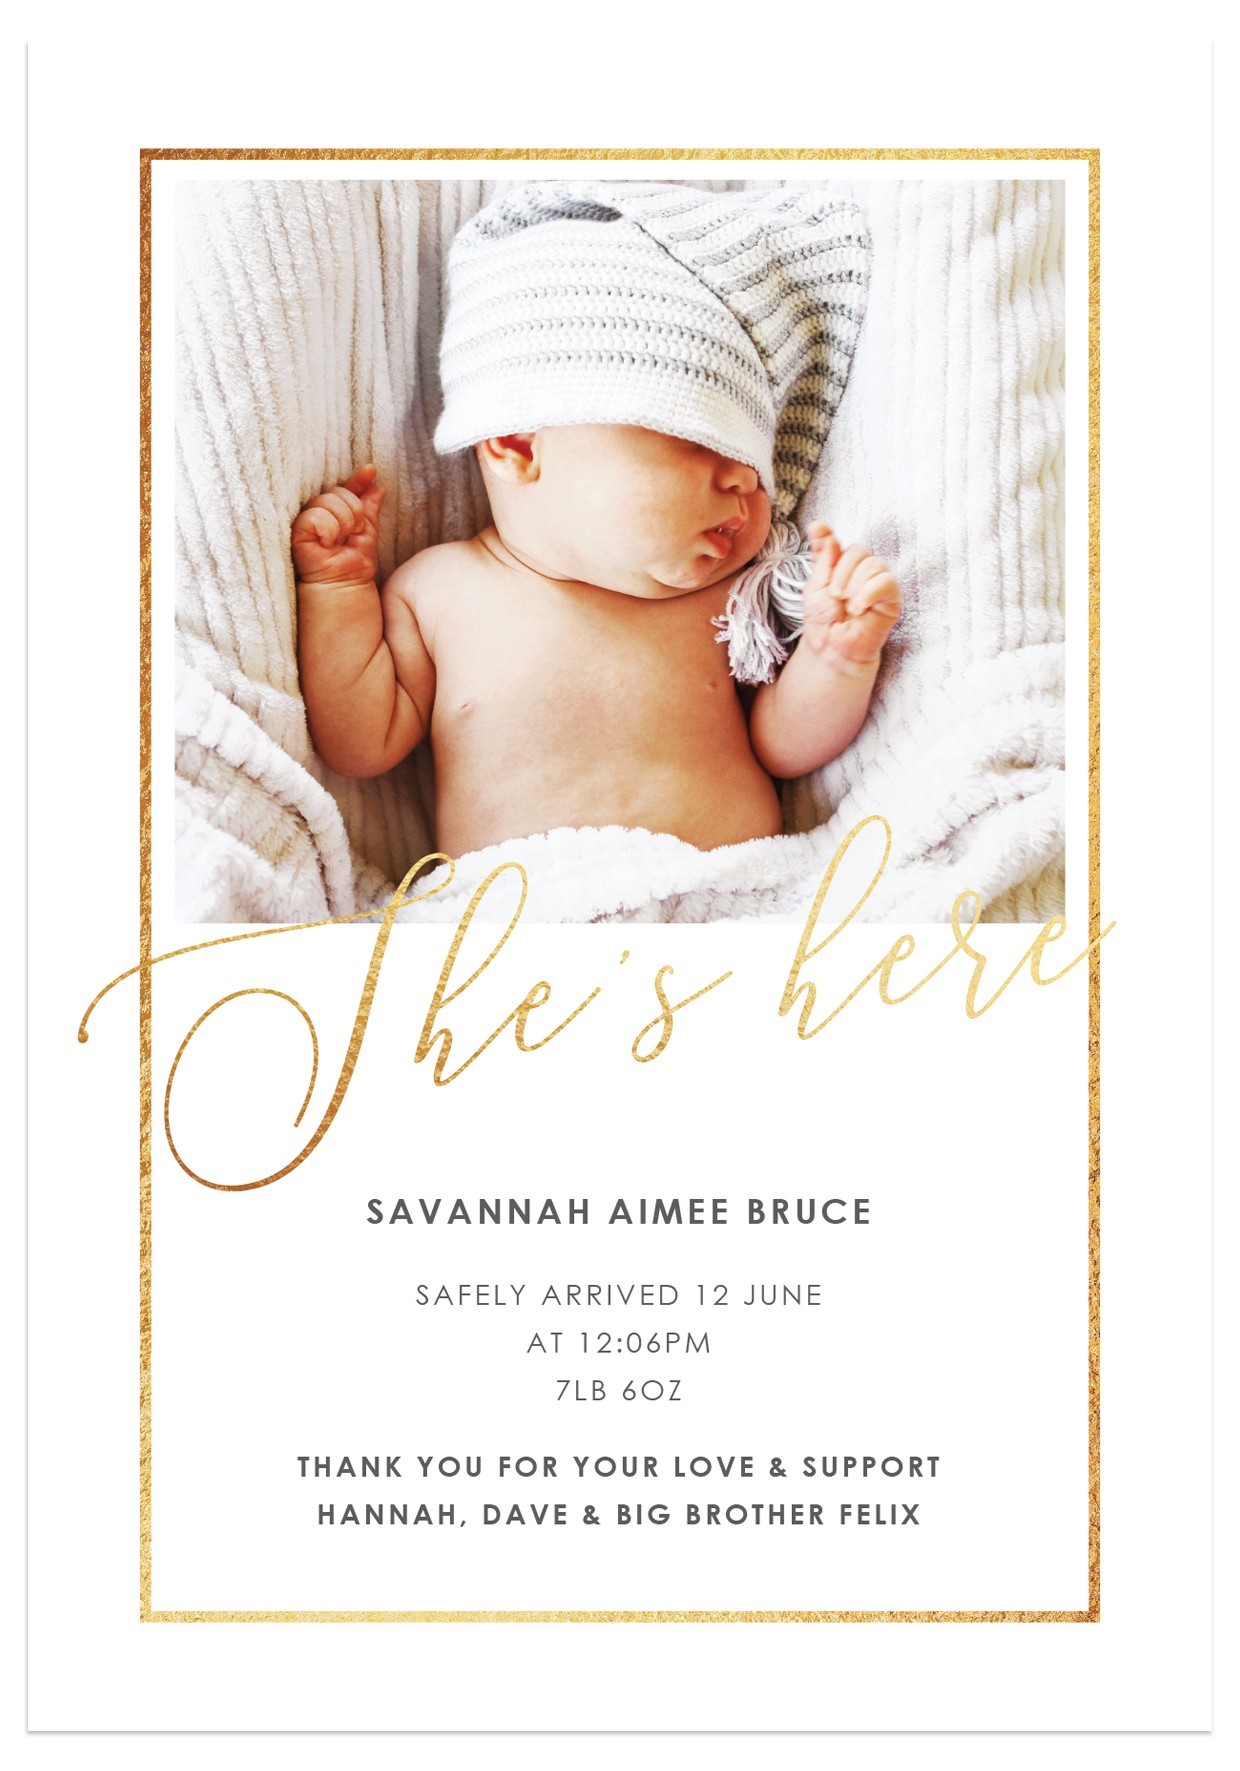 She's Here Baby Announcement Cards